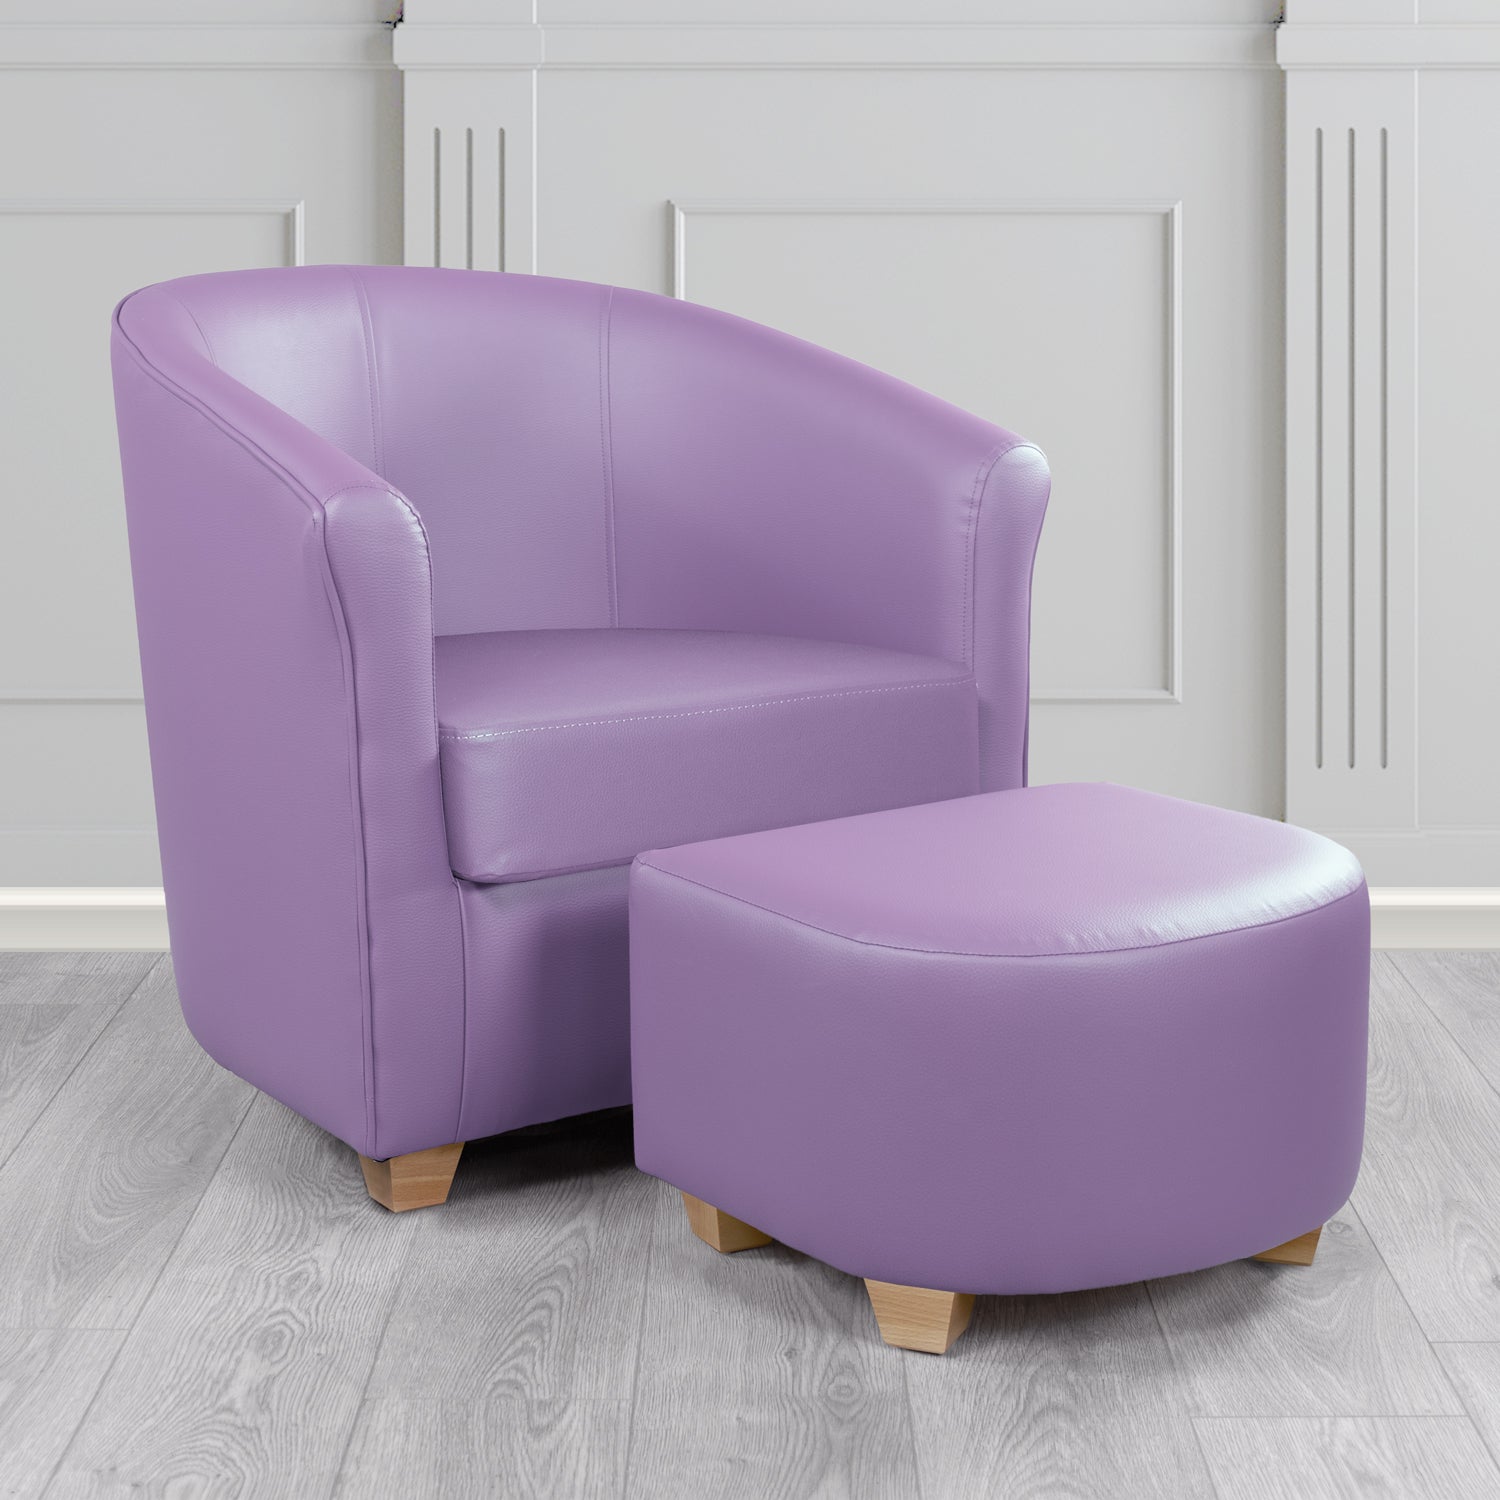 Cannes Tub Chair with Footstool Set in Just Colour Lilac Crib 5 Faux Leather - The Tub Chair Shop